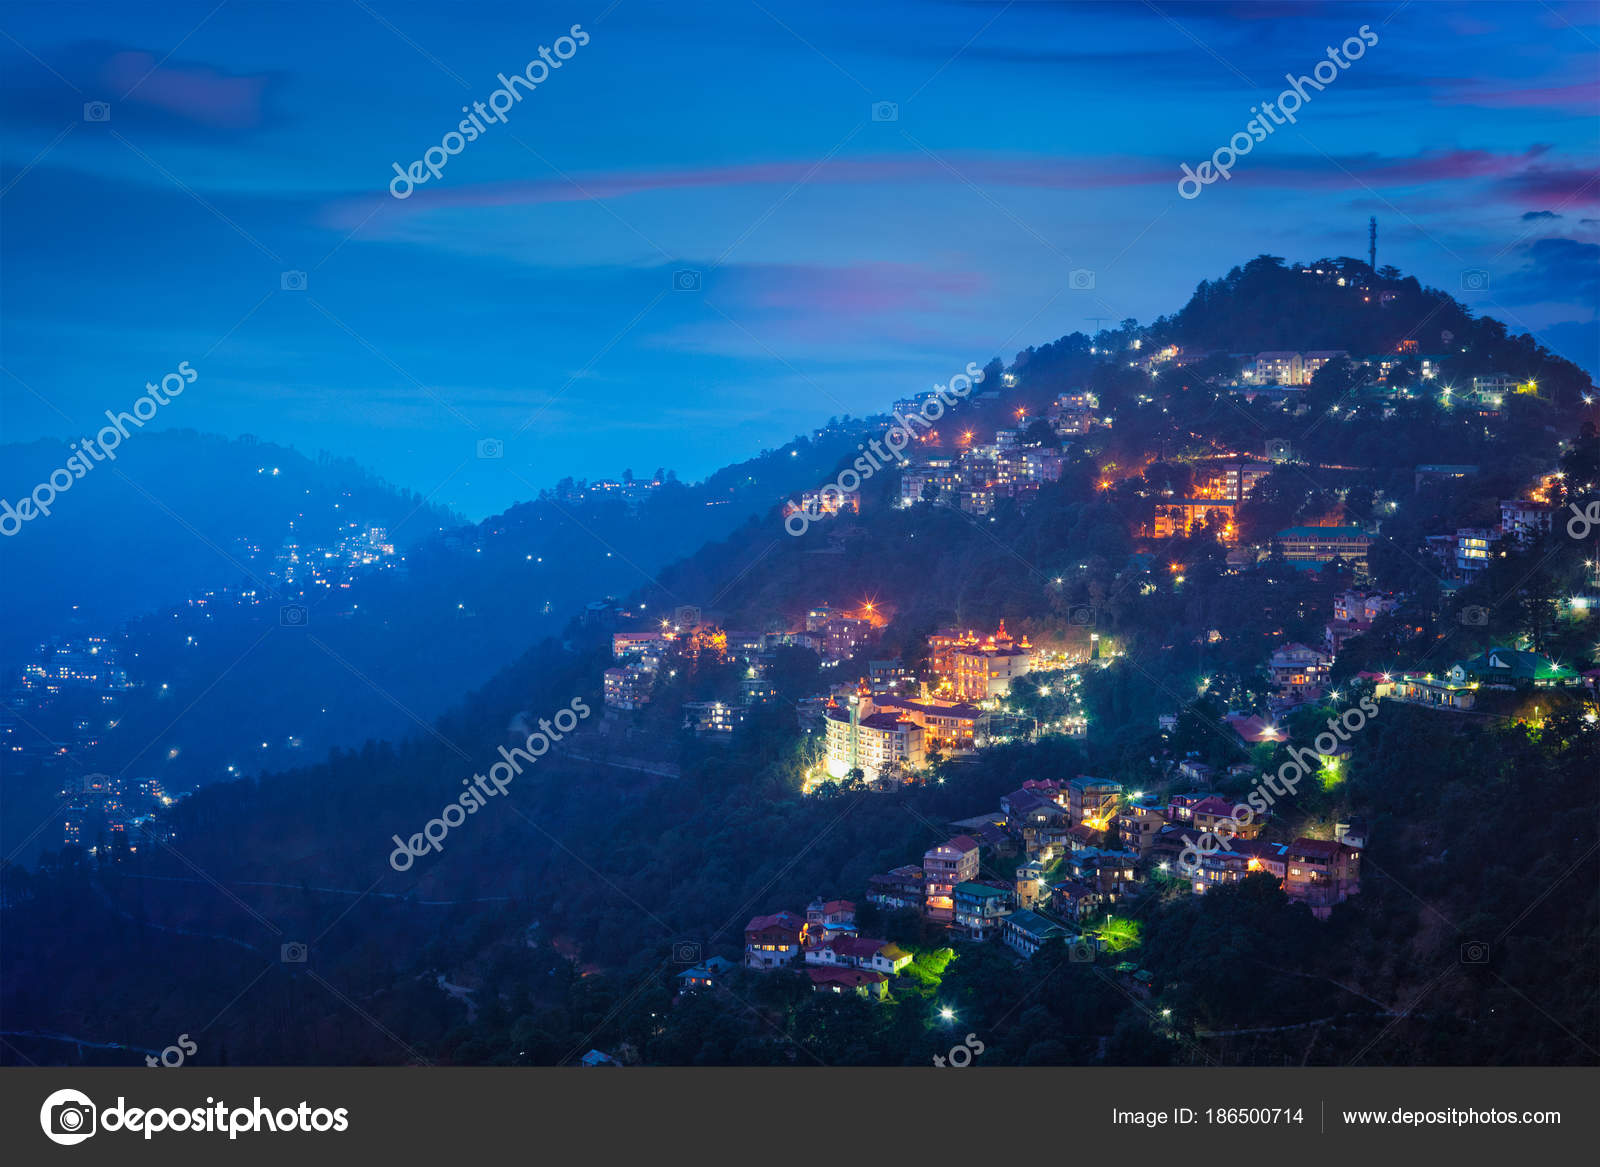 Shimla Tourism (2023) - India > Top Things To Do, Images, Tours & Packages